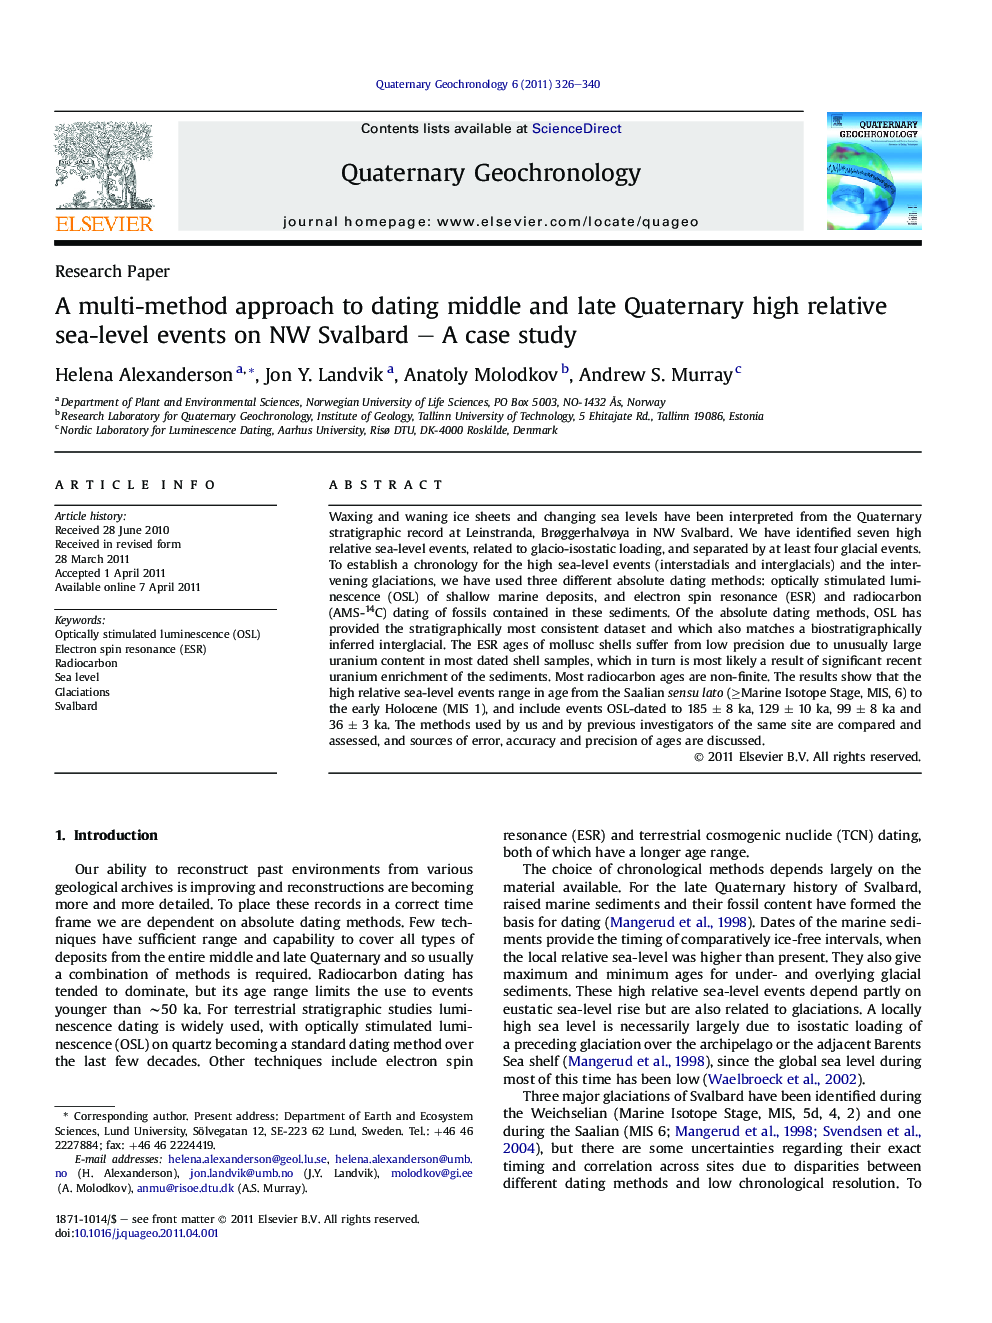 A multi-method approach to dating middle and late Quaternary high relative sea-level events on NW Svalbard – A case study